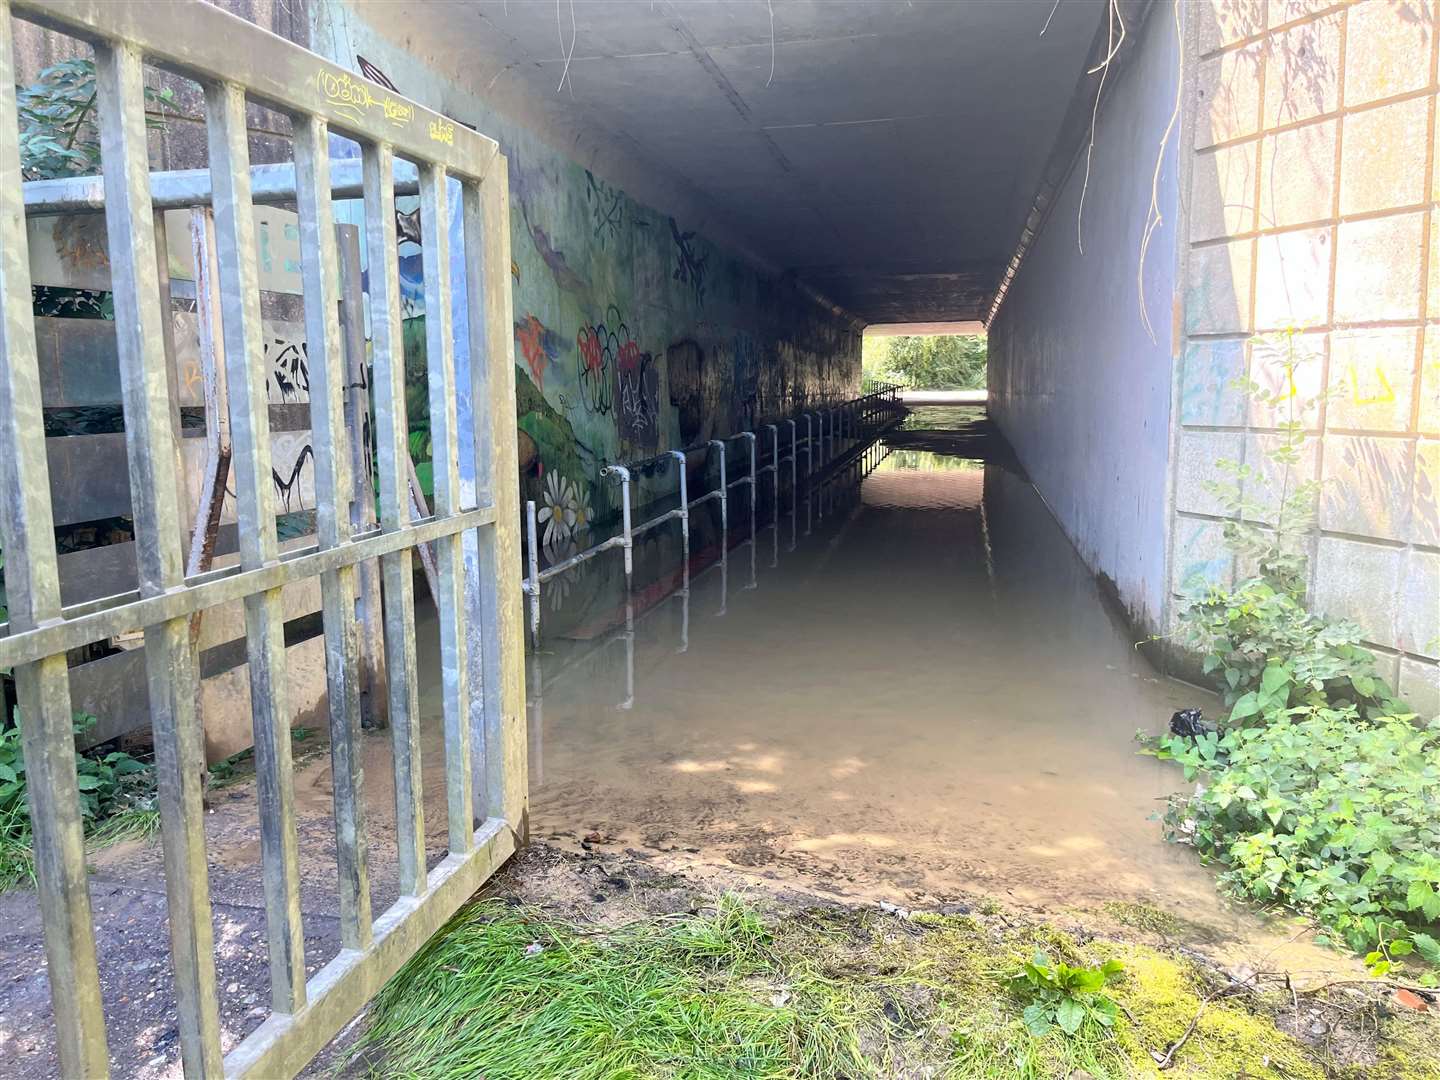 The water main burst at a nearby underpass